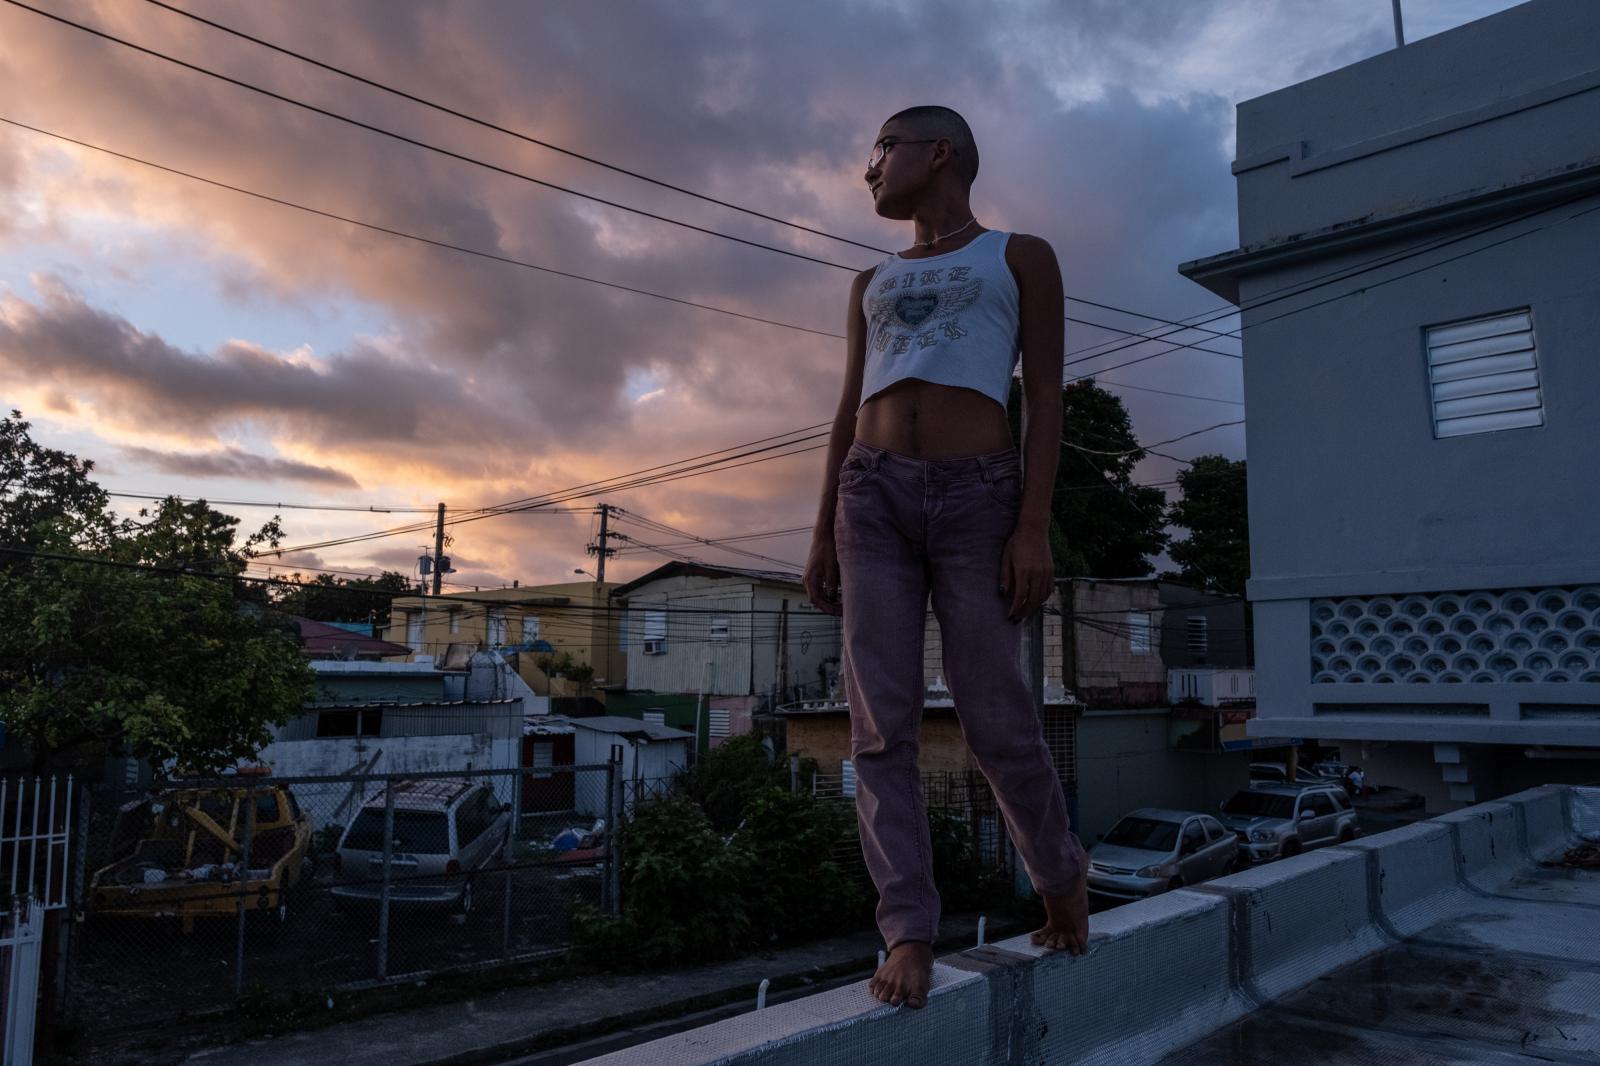 "Here We Can Express Ourselves With Freedom.' In Puerto Rico, A Trans Collective Is Reimagining Family Values"